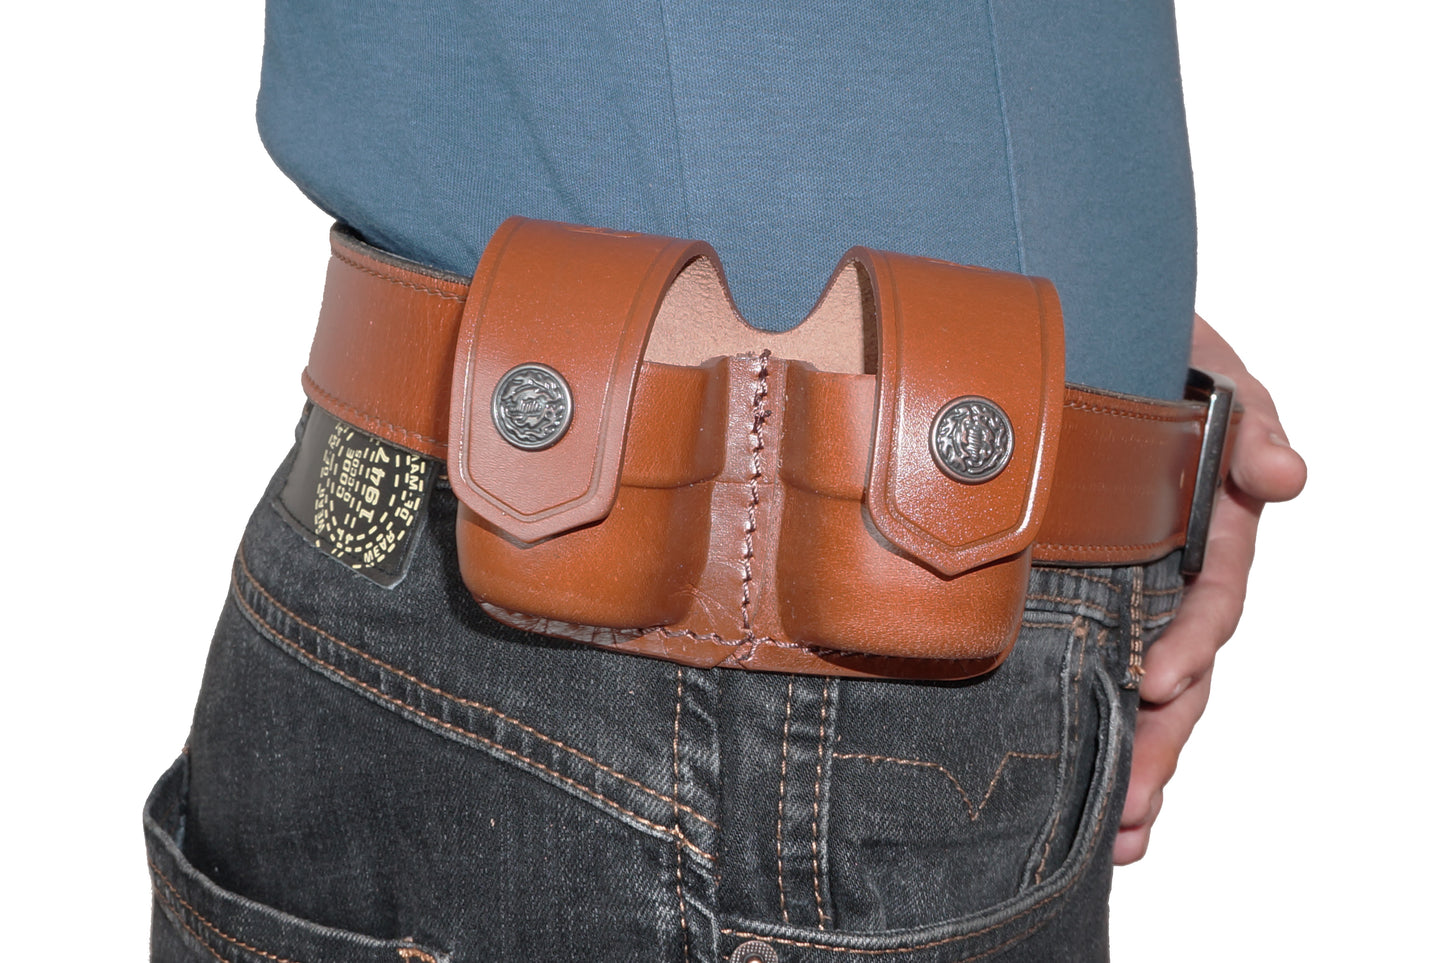 ALS3838 Two Double Speedloader Pouch for for 357 Magnum 6 & 7 Shots, 44 Magnum 5 Shot, S&W .38 Special 6 Shot speedloaders Genuine Leather Handmade!